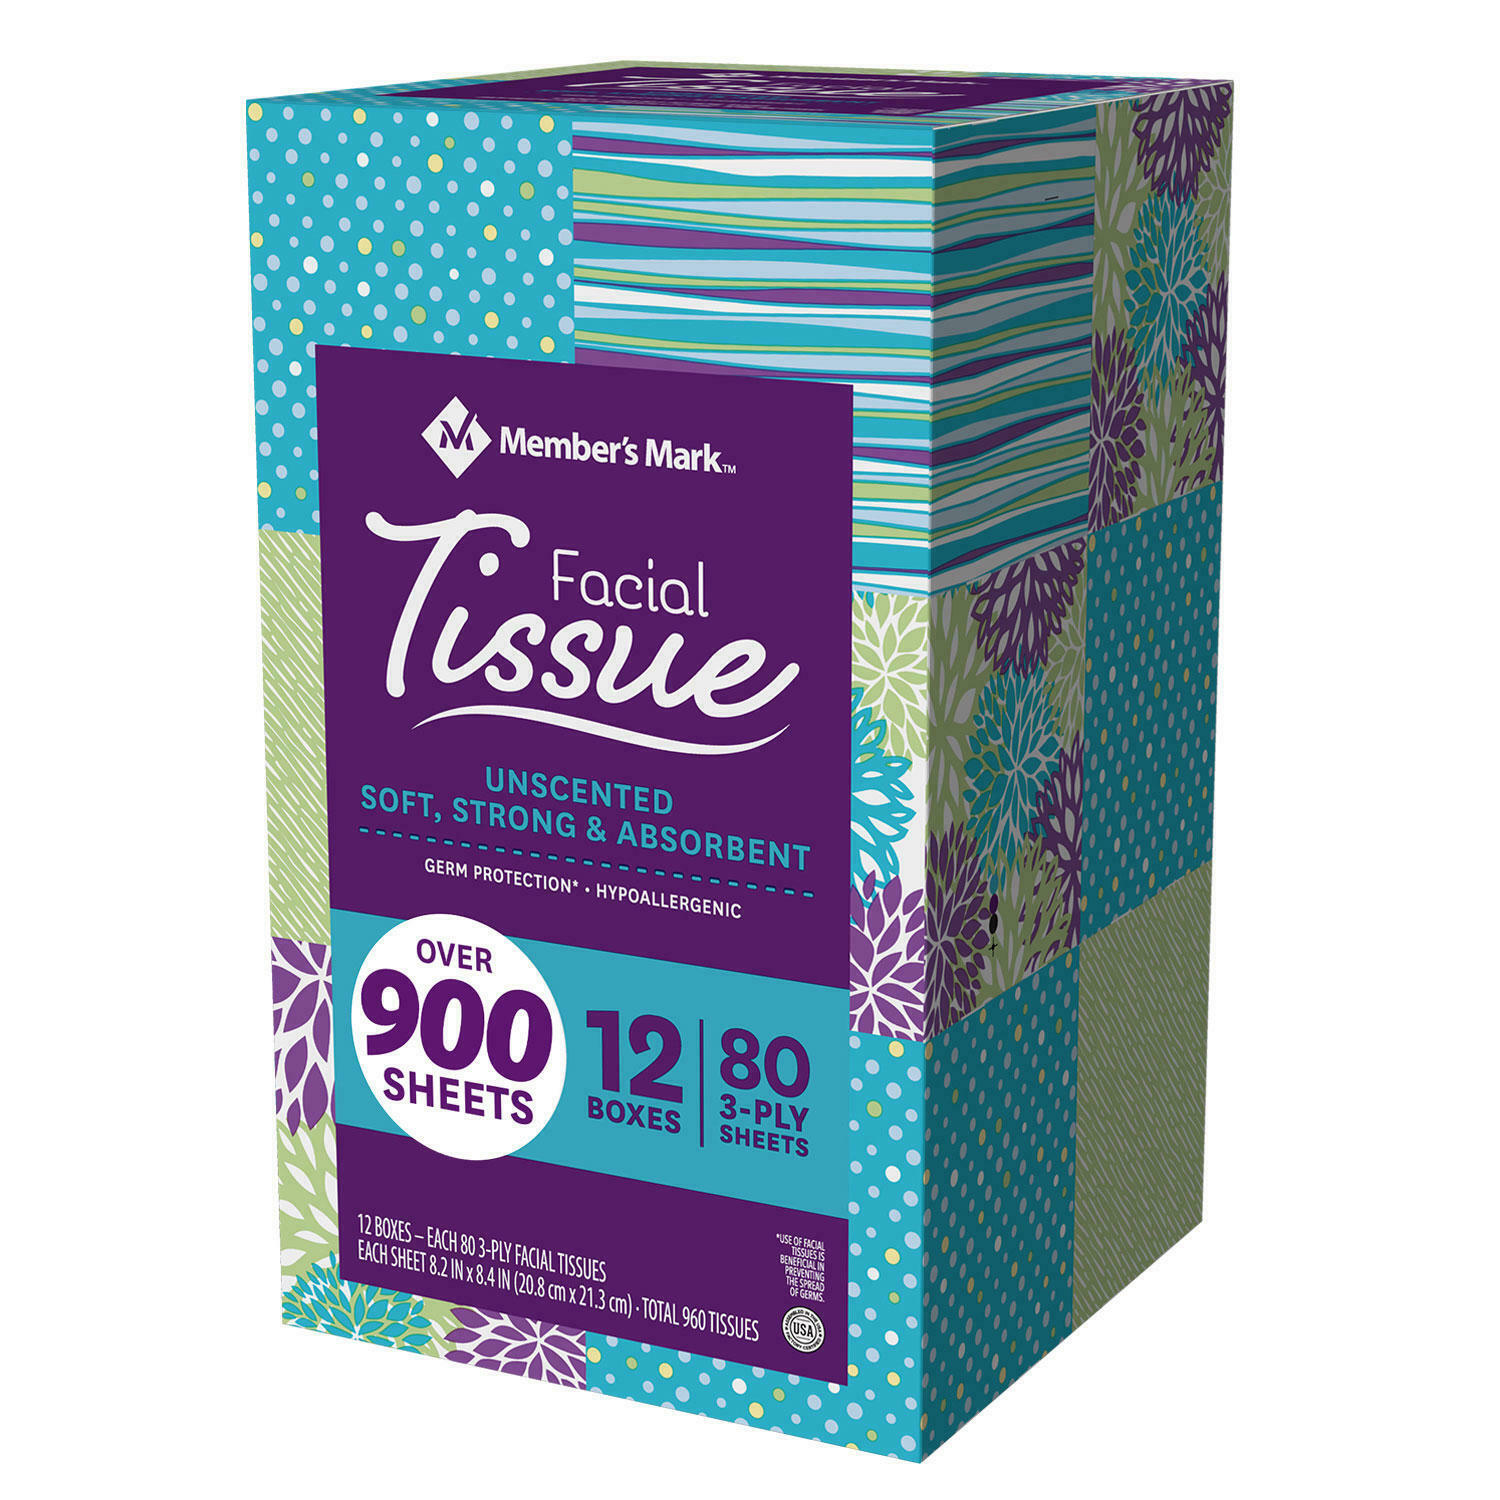 Member's Mark Ultra Soft Facial Tissues, 12 Cube Boxes, 3-ply Tissues (960 Ct.)